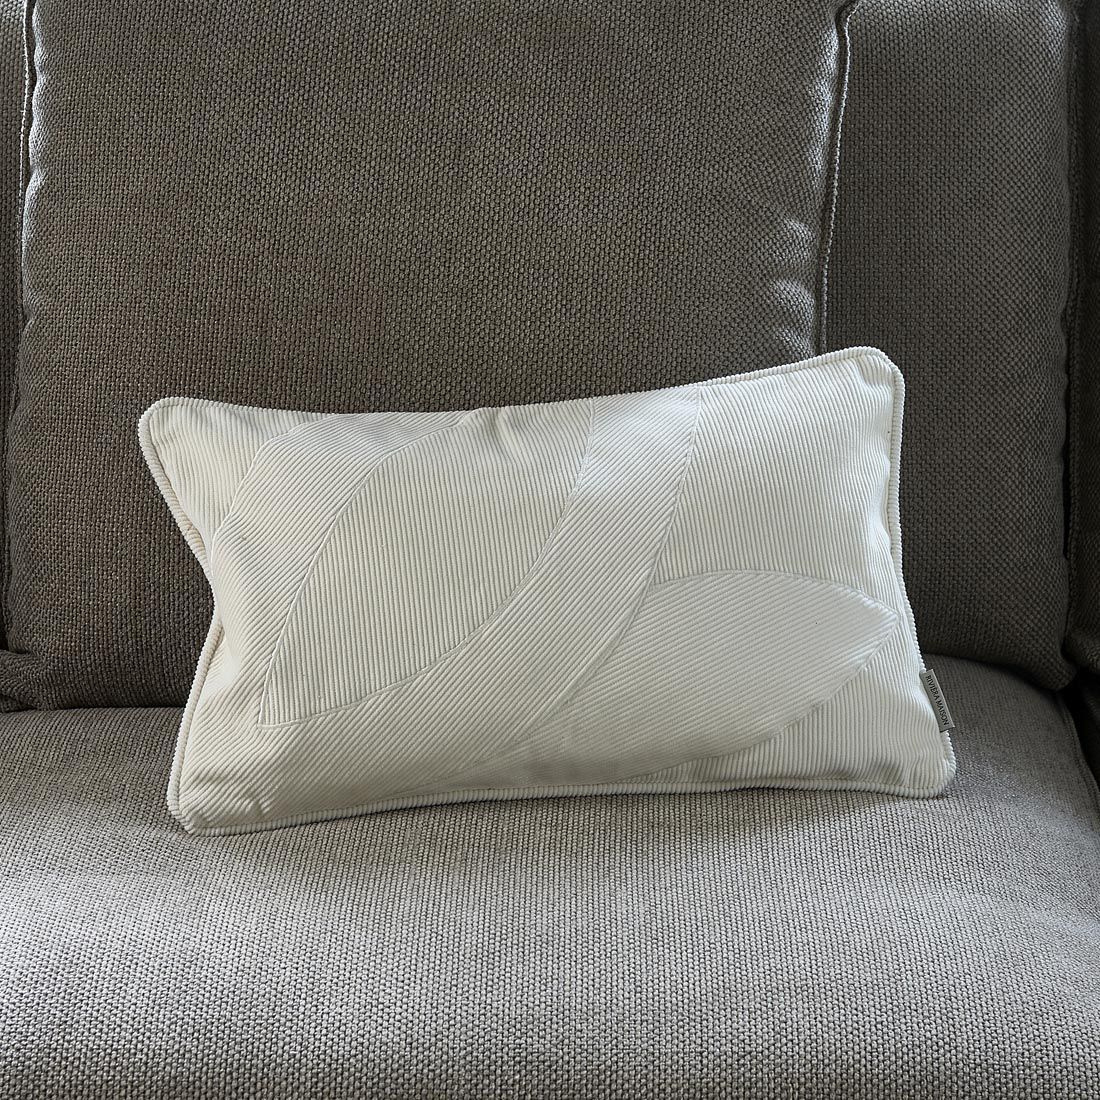 Purity Rib Leave Pillow Cover 50x30